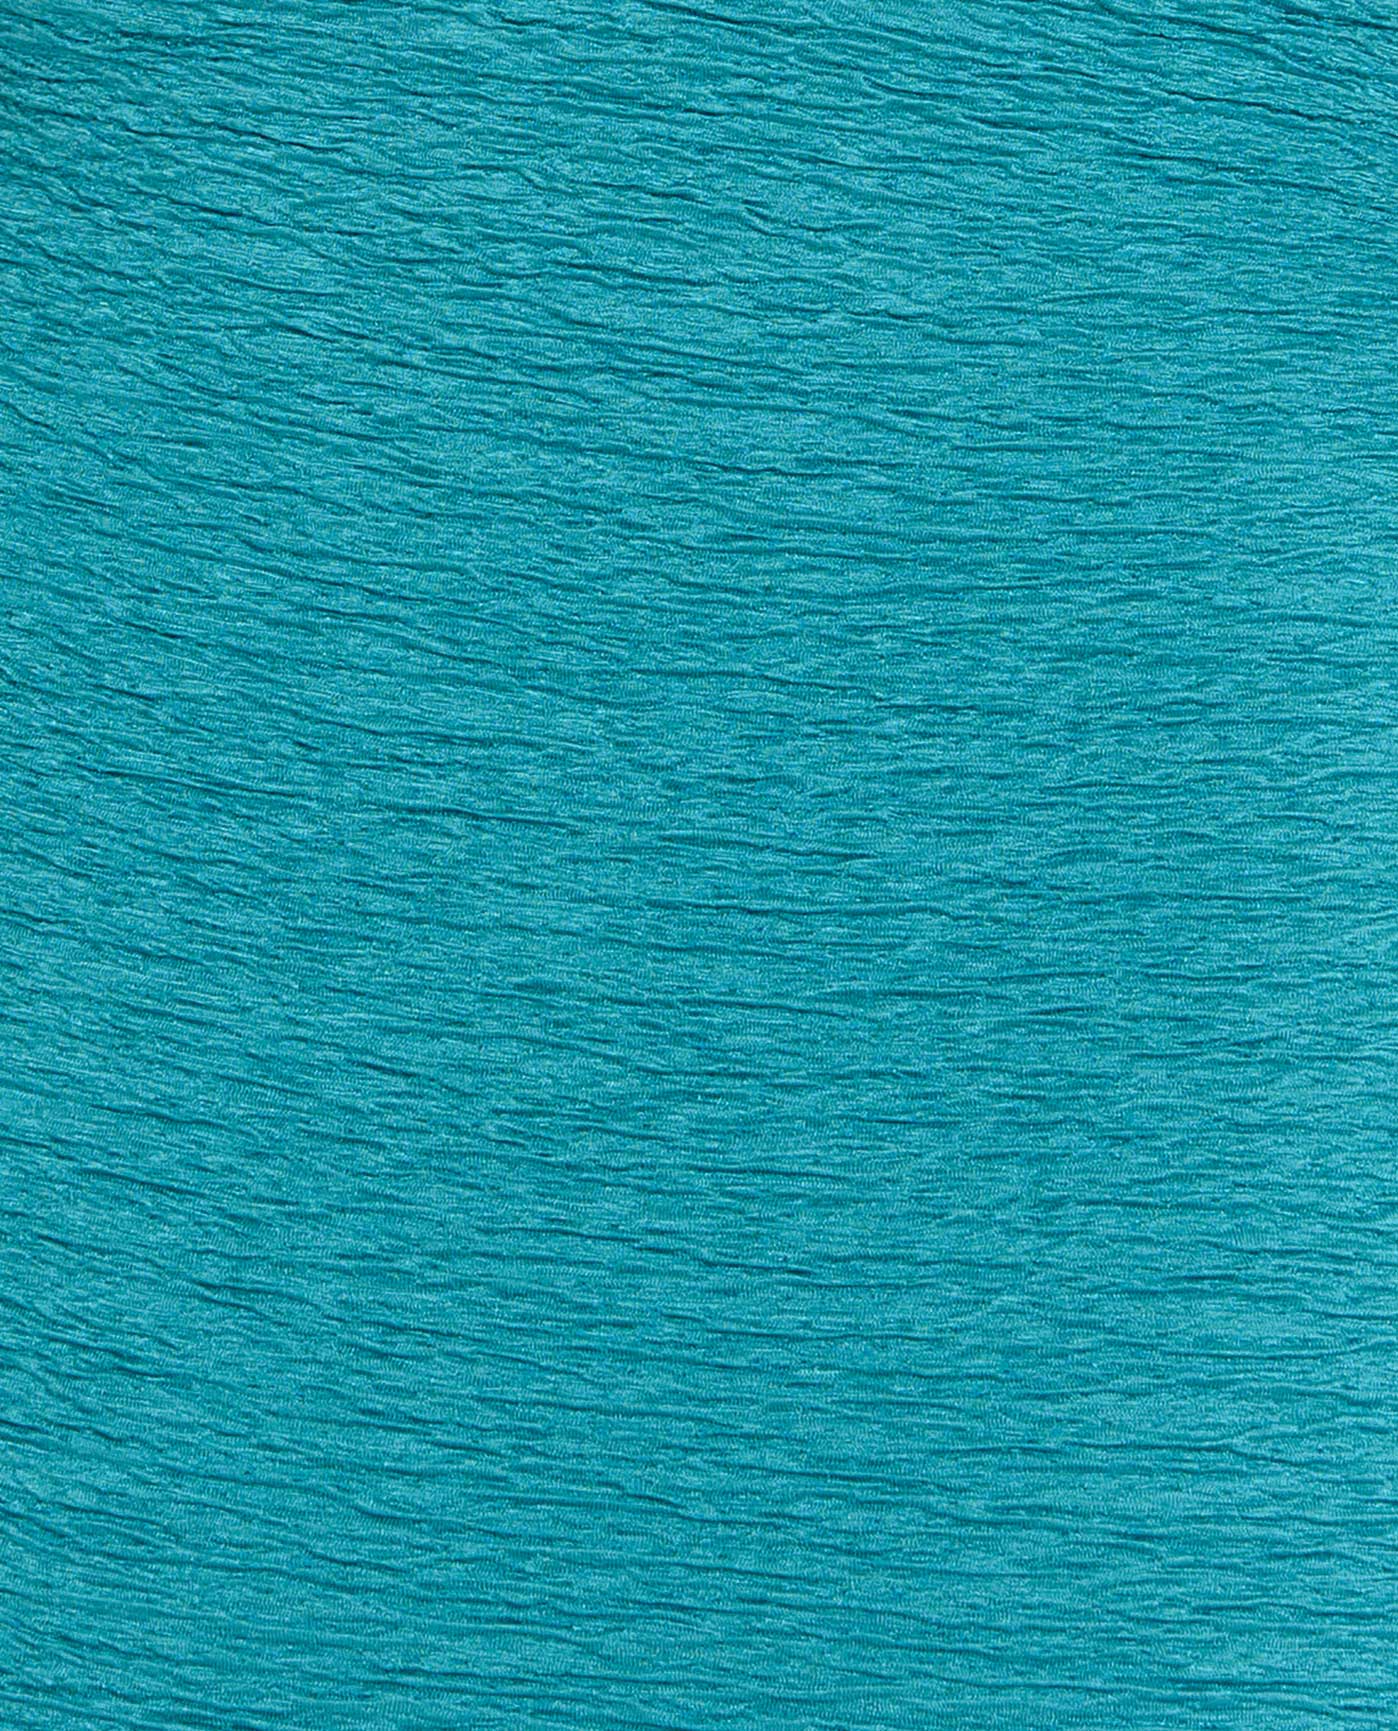 FABRIC SWATCH VIEW OF CHLORINE RESISTANT KRINKLE TEXTURED SOLID X-BACK ONE PIECE | KRINKLE ARUBA